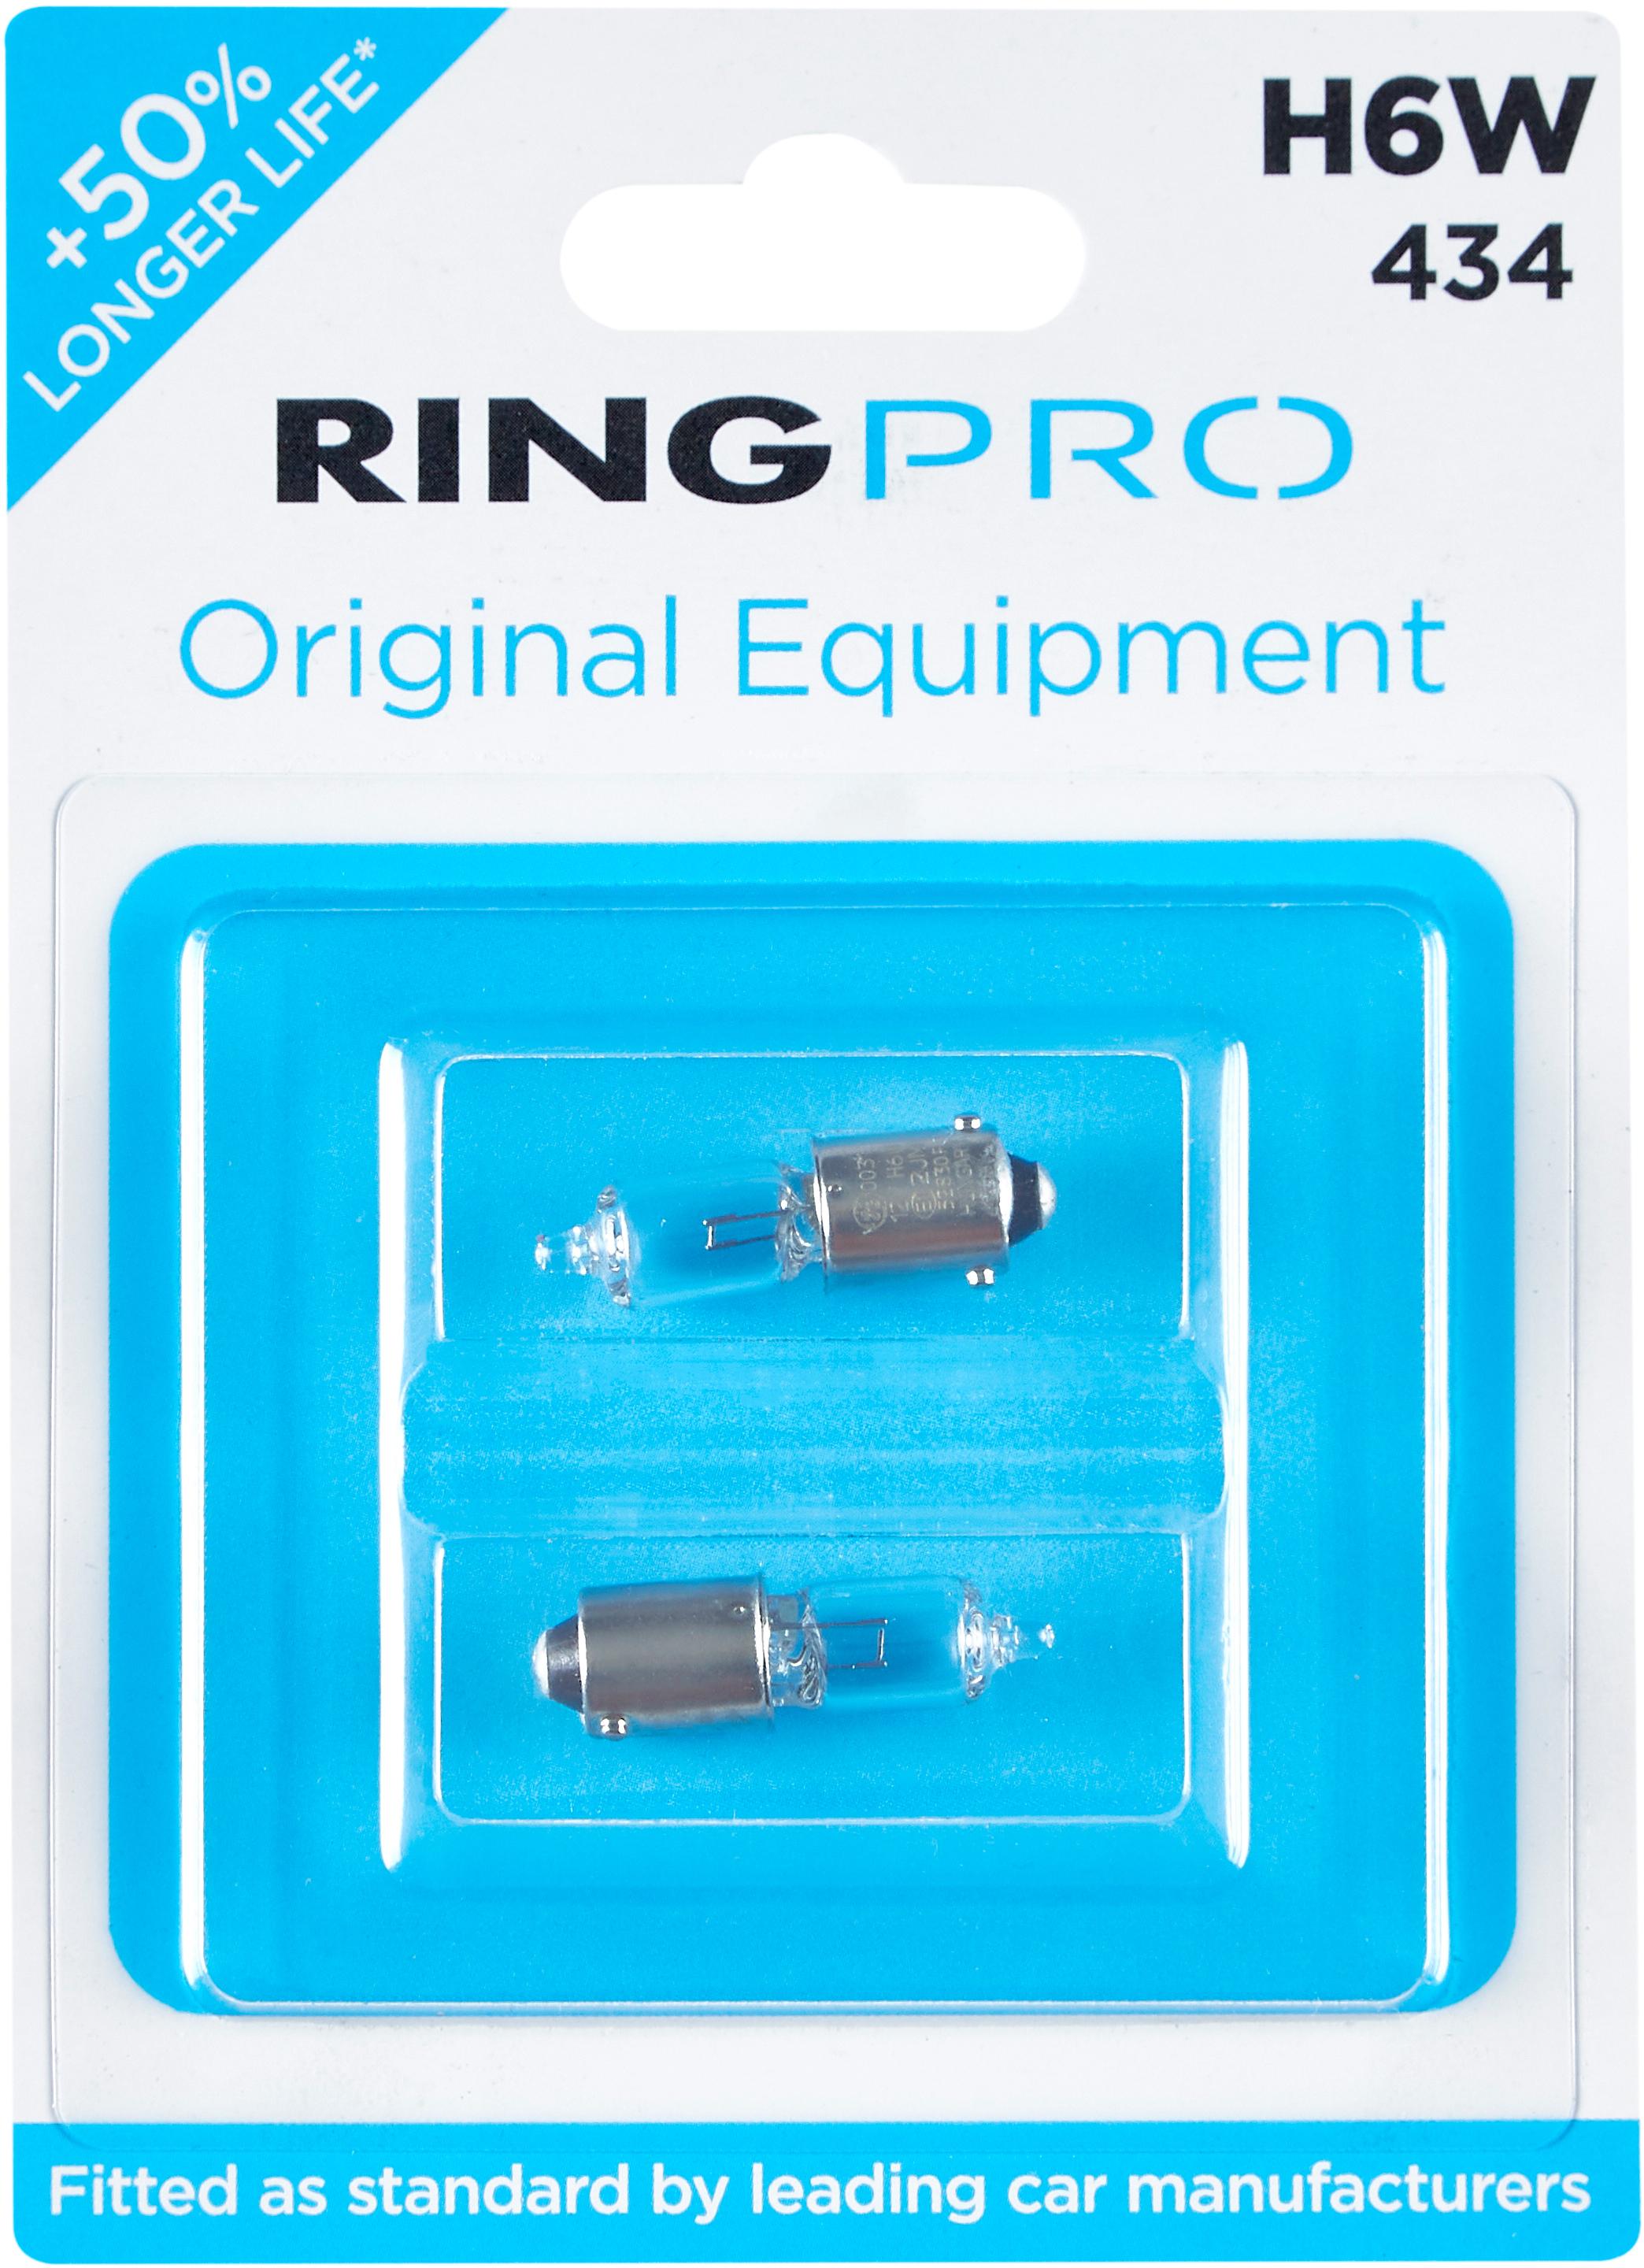 Ring Pro 434 H6W Car Bulb Twin Pack